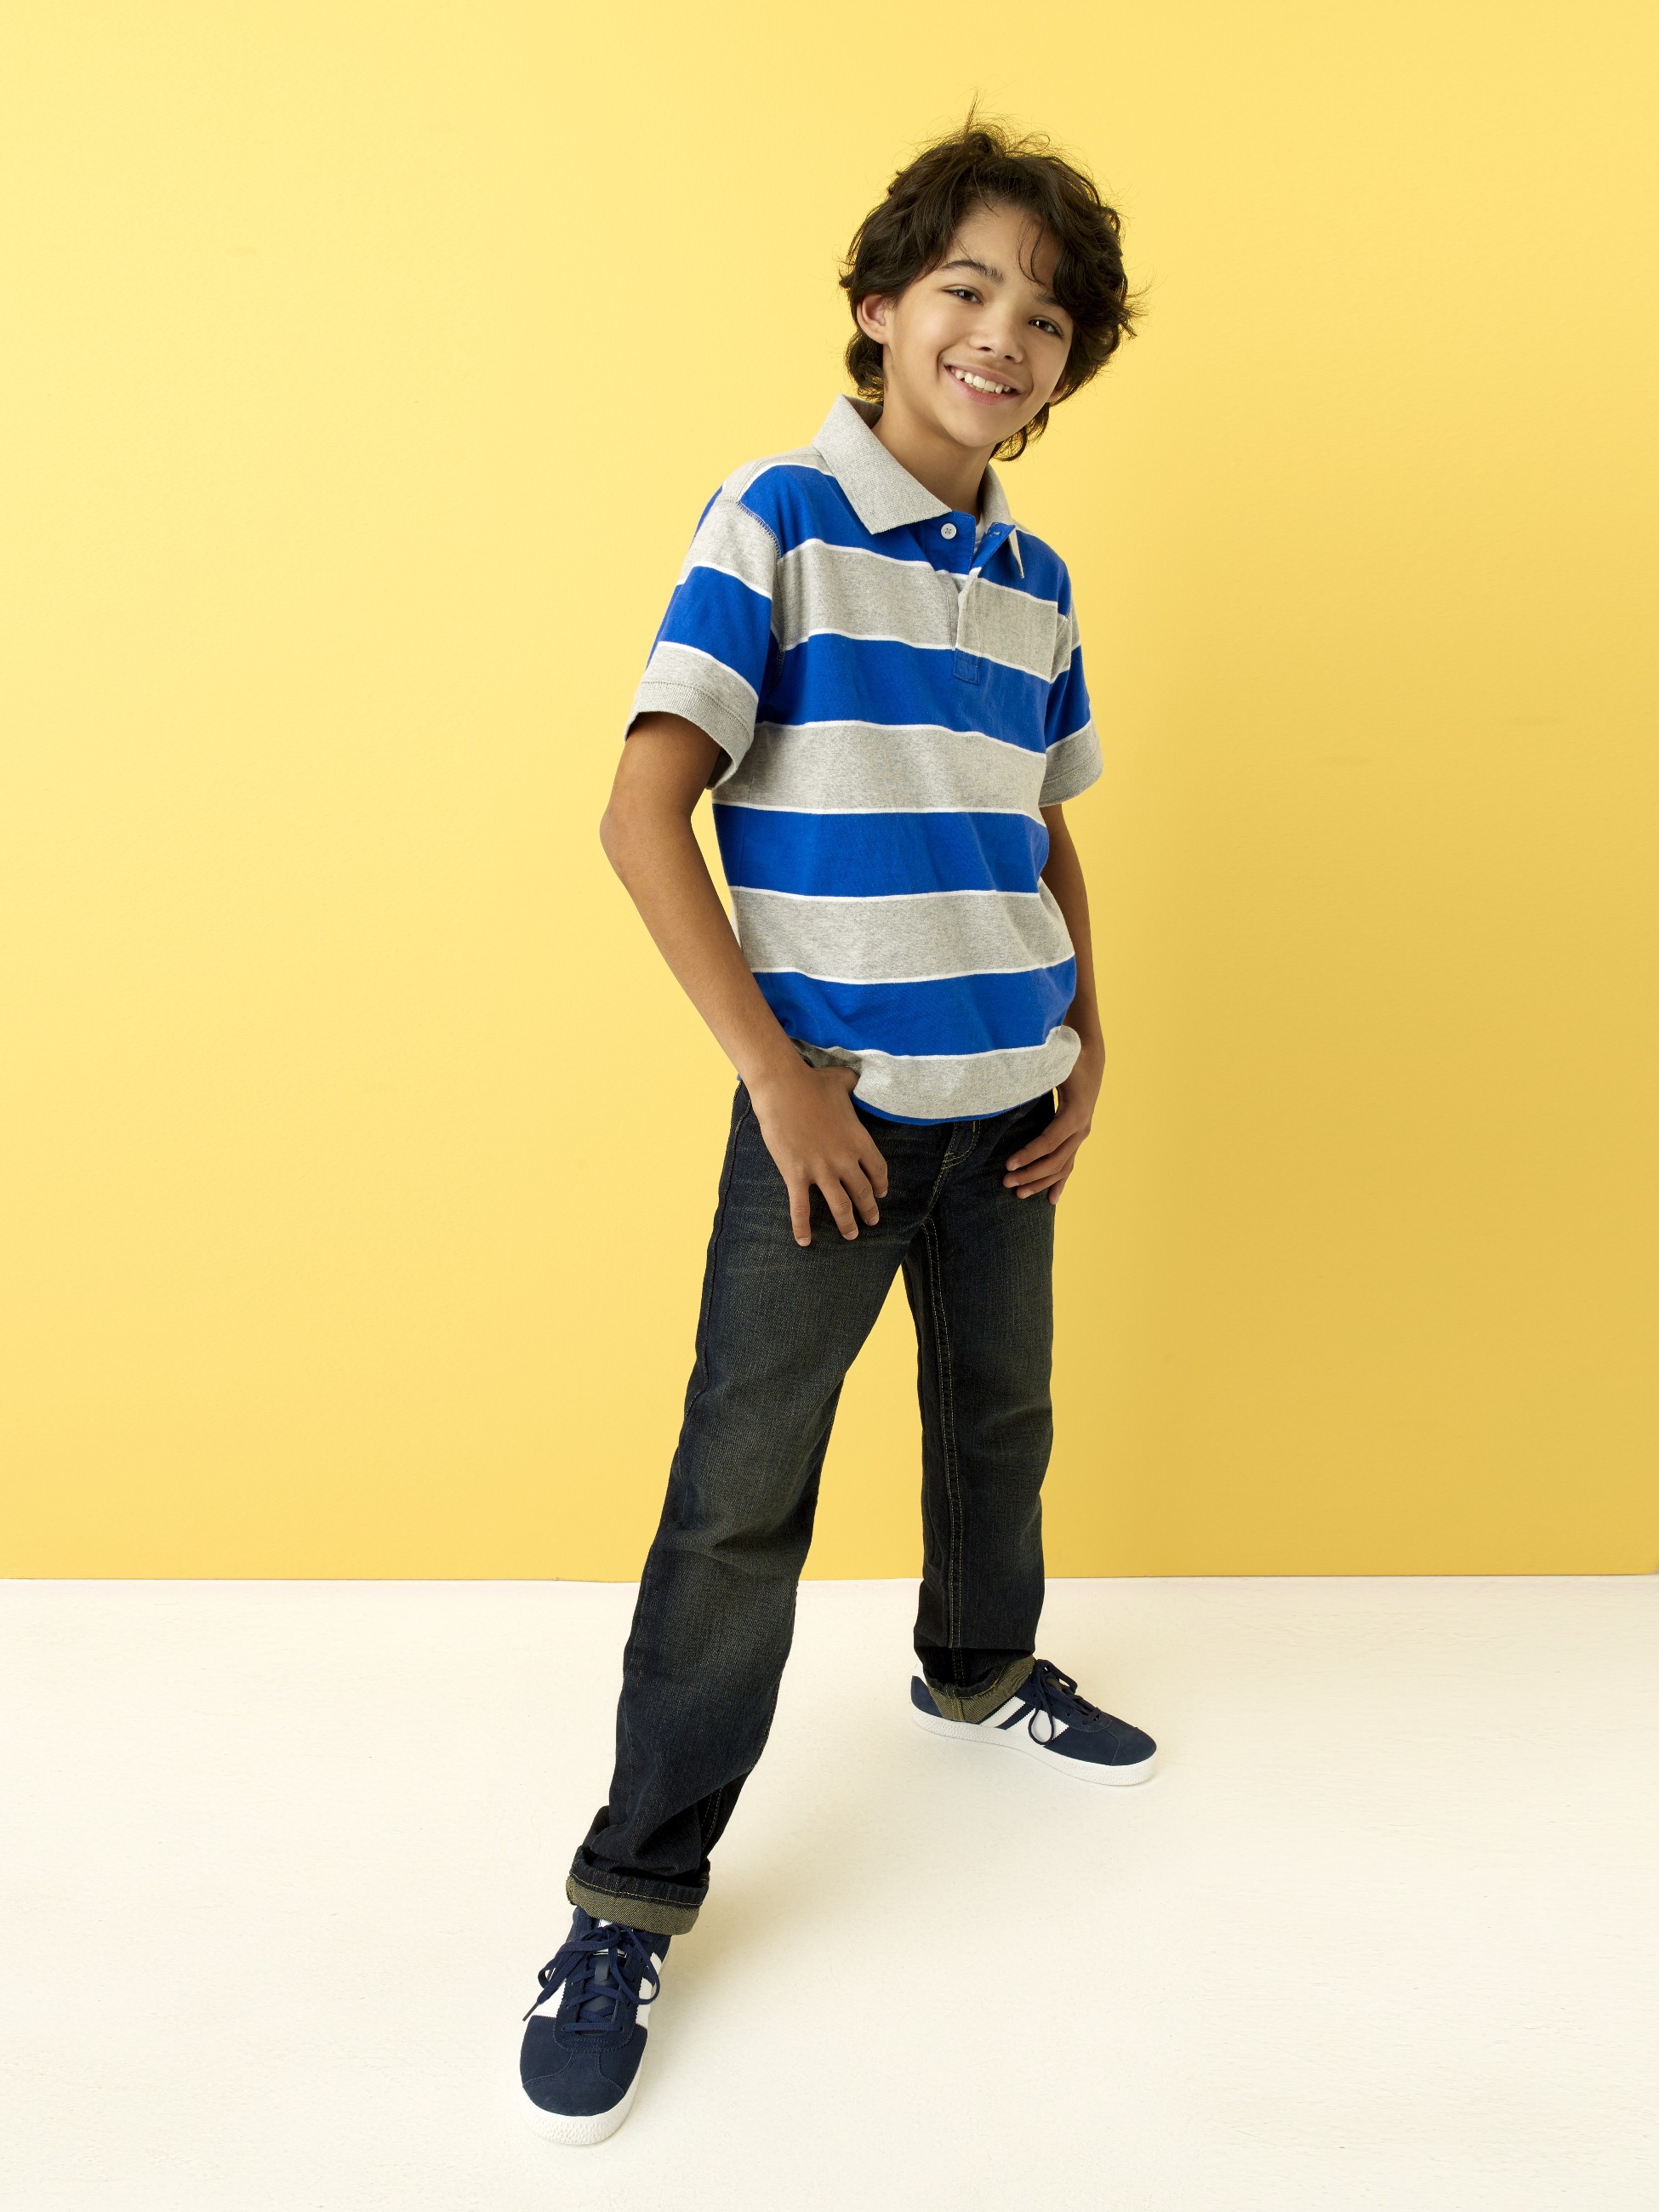 Simply Styled Boys' Polo Shirt - Striped